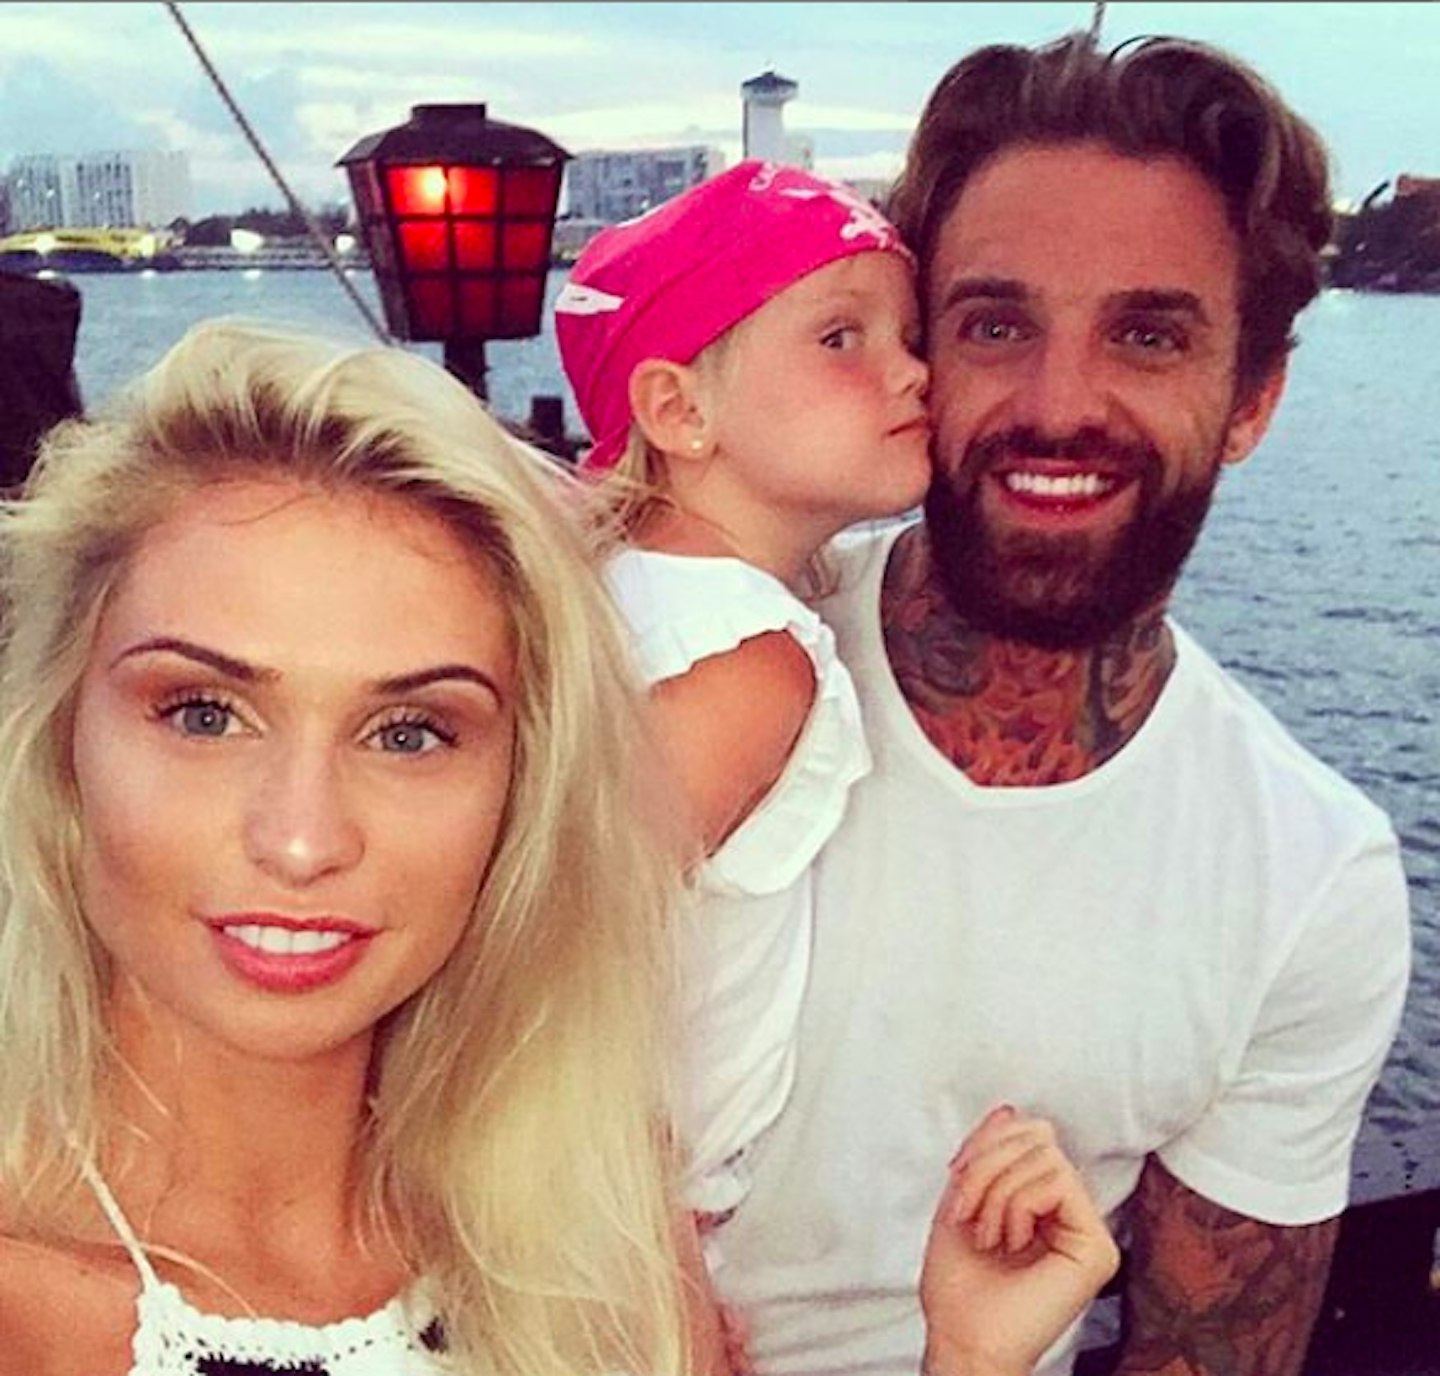 Aaron announced he was expecting his first child with girlfriend Talia Oatway, with some beautiful family portraits of them together along with Talia's daughter, who Aaron's played step-dad to since they got together two years ago.    The shock announcement came just days after reports the couple had split as they unfollowed each other on social media.